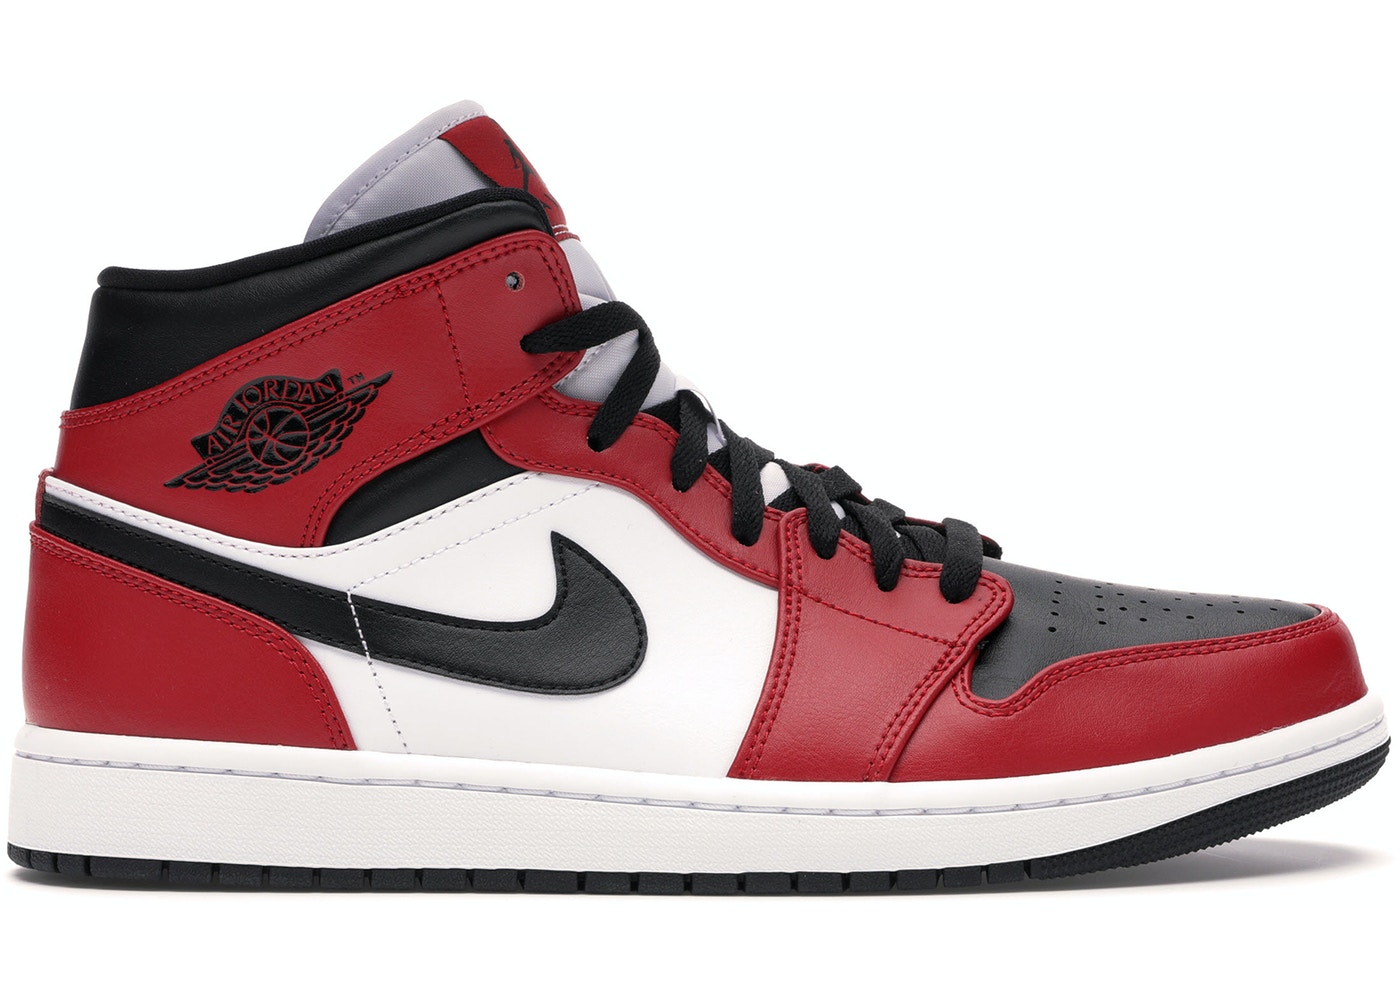 Air Jordan 1 Size Chart and Fitting - Size-Charts.com